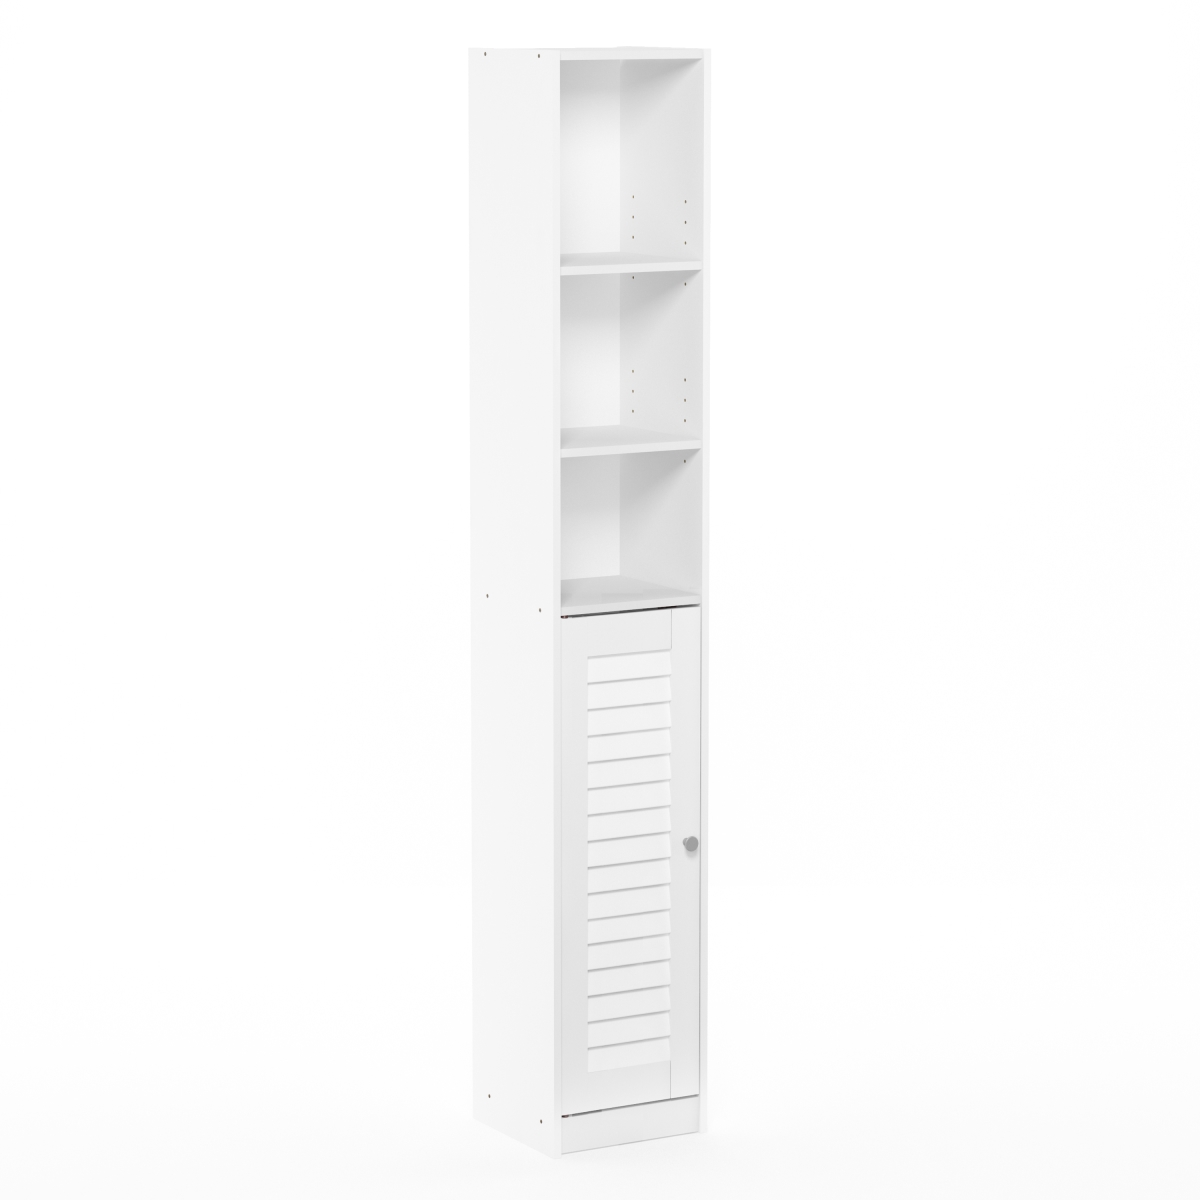 Fr18511wh Indo Slim Luver Door Bath Cabinet - White - 62.99 X 9.84 X 9.84 In.